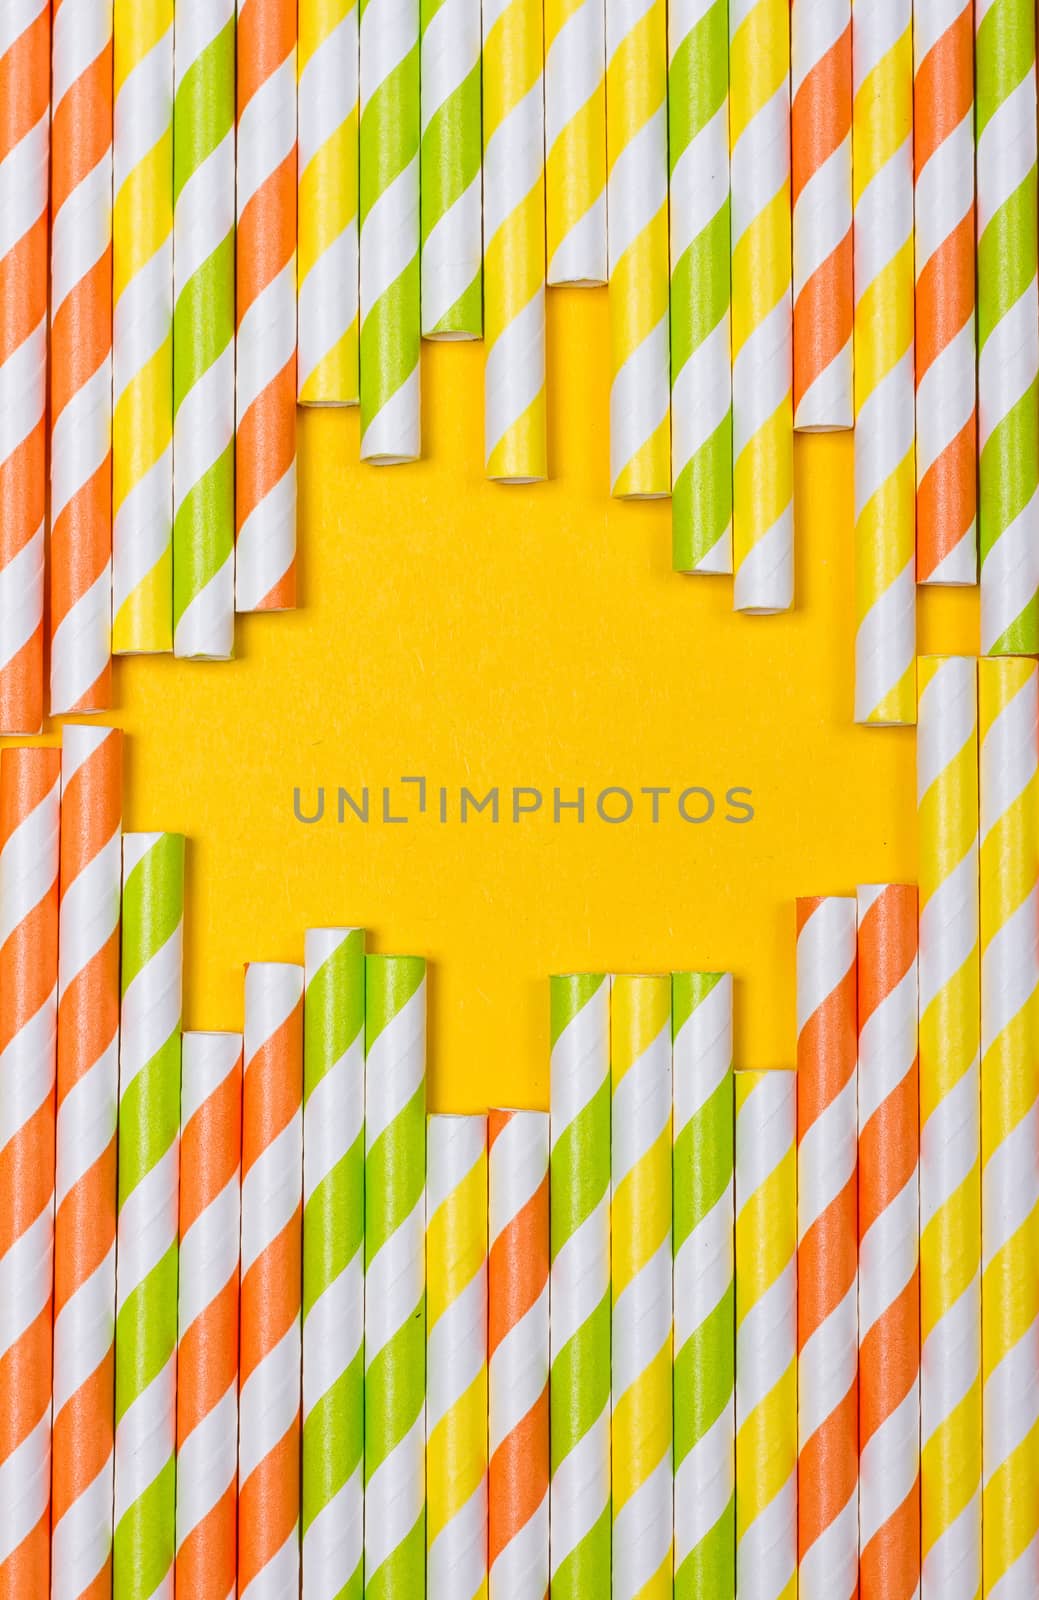 close-up colorful fancy drinking straws, fancy tube for party on the yellow background